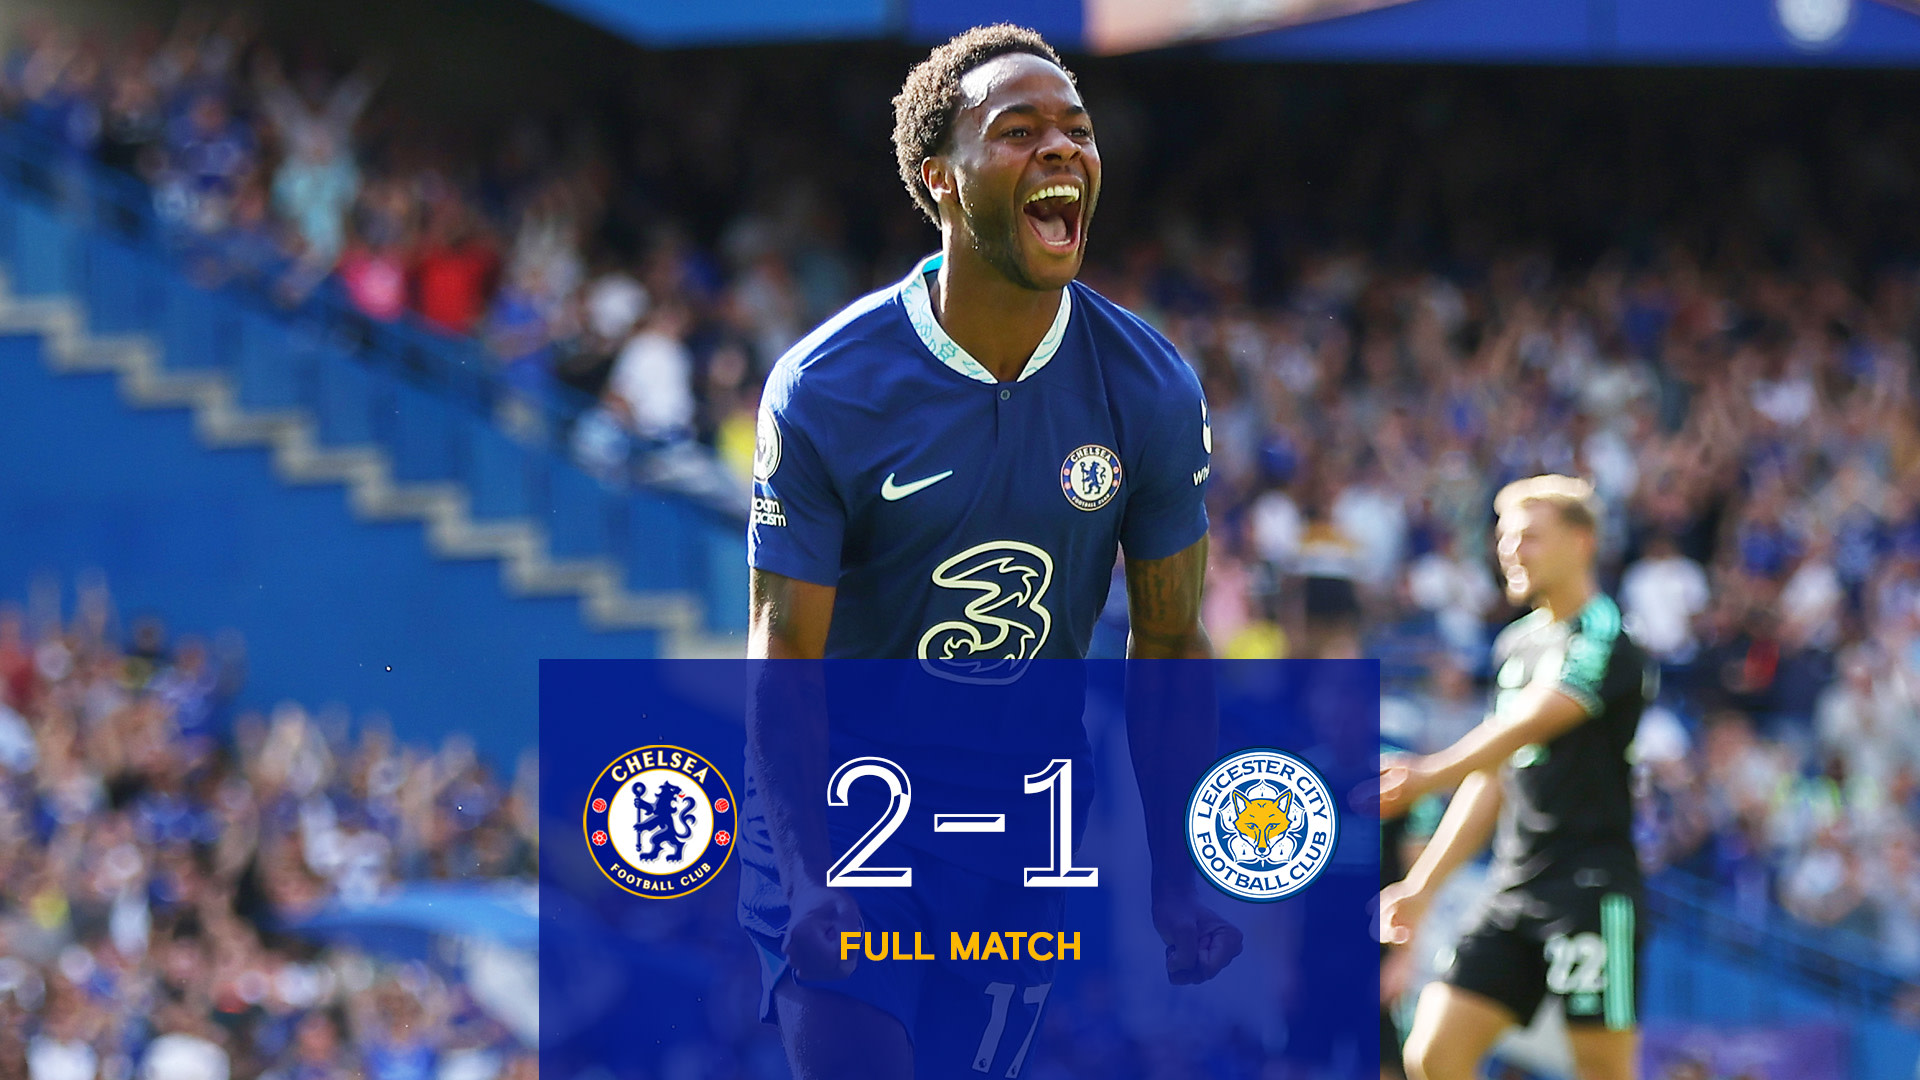 Chelsea 2-1 Leicester City Premier League Full Match Video Official Site Chelsea Football Club